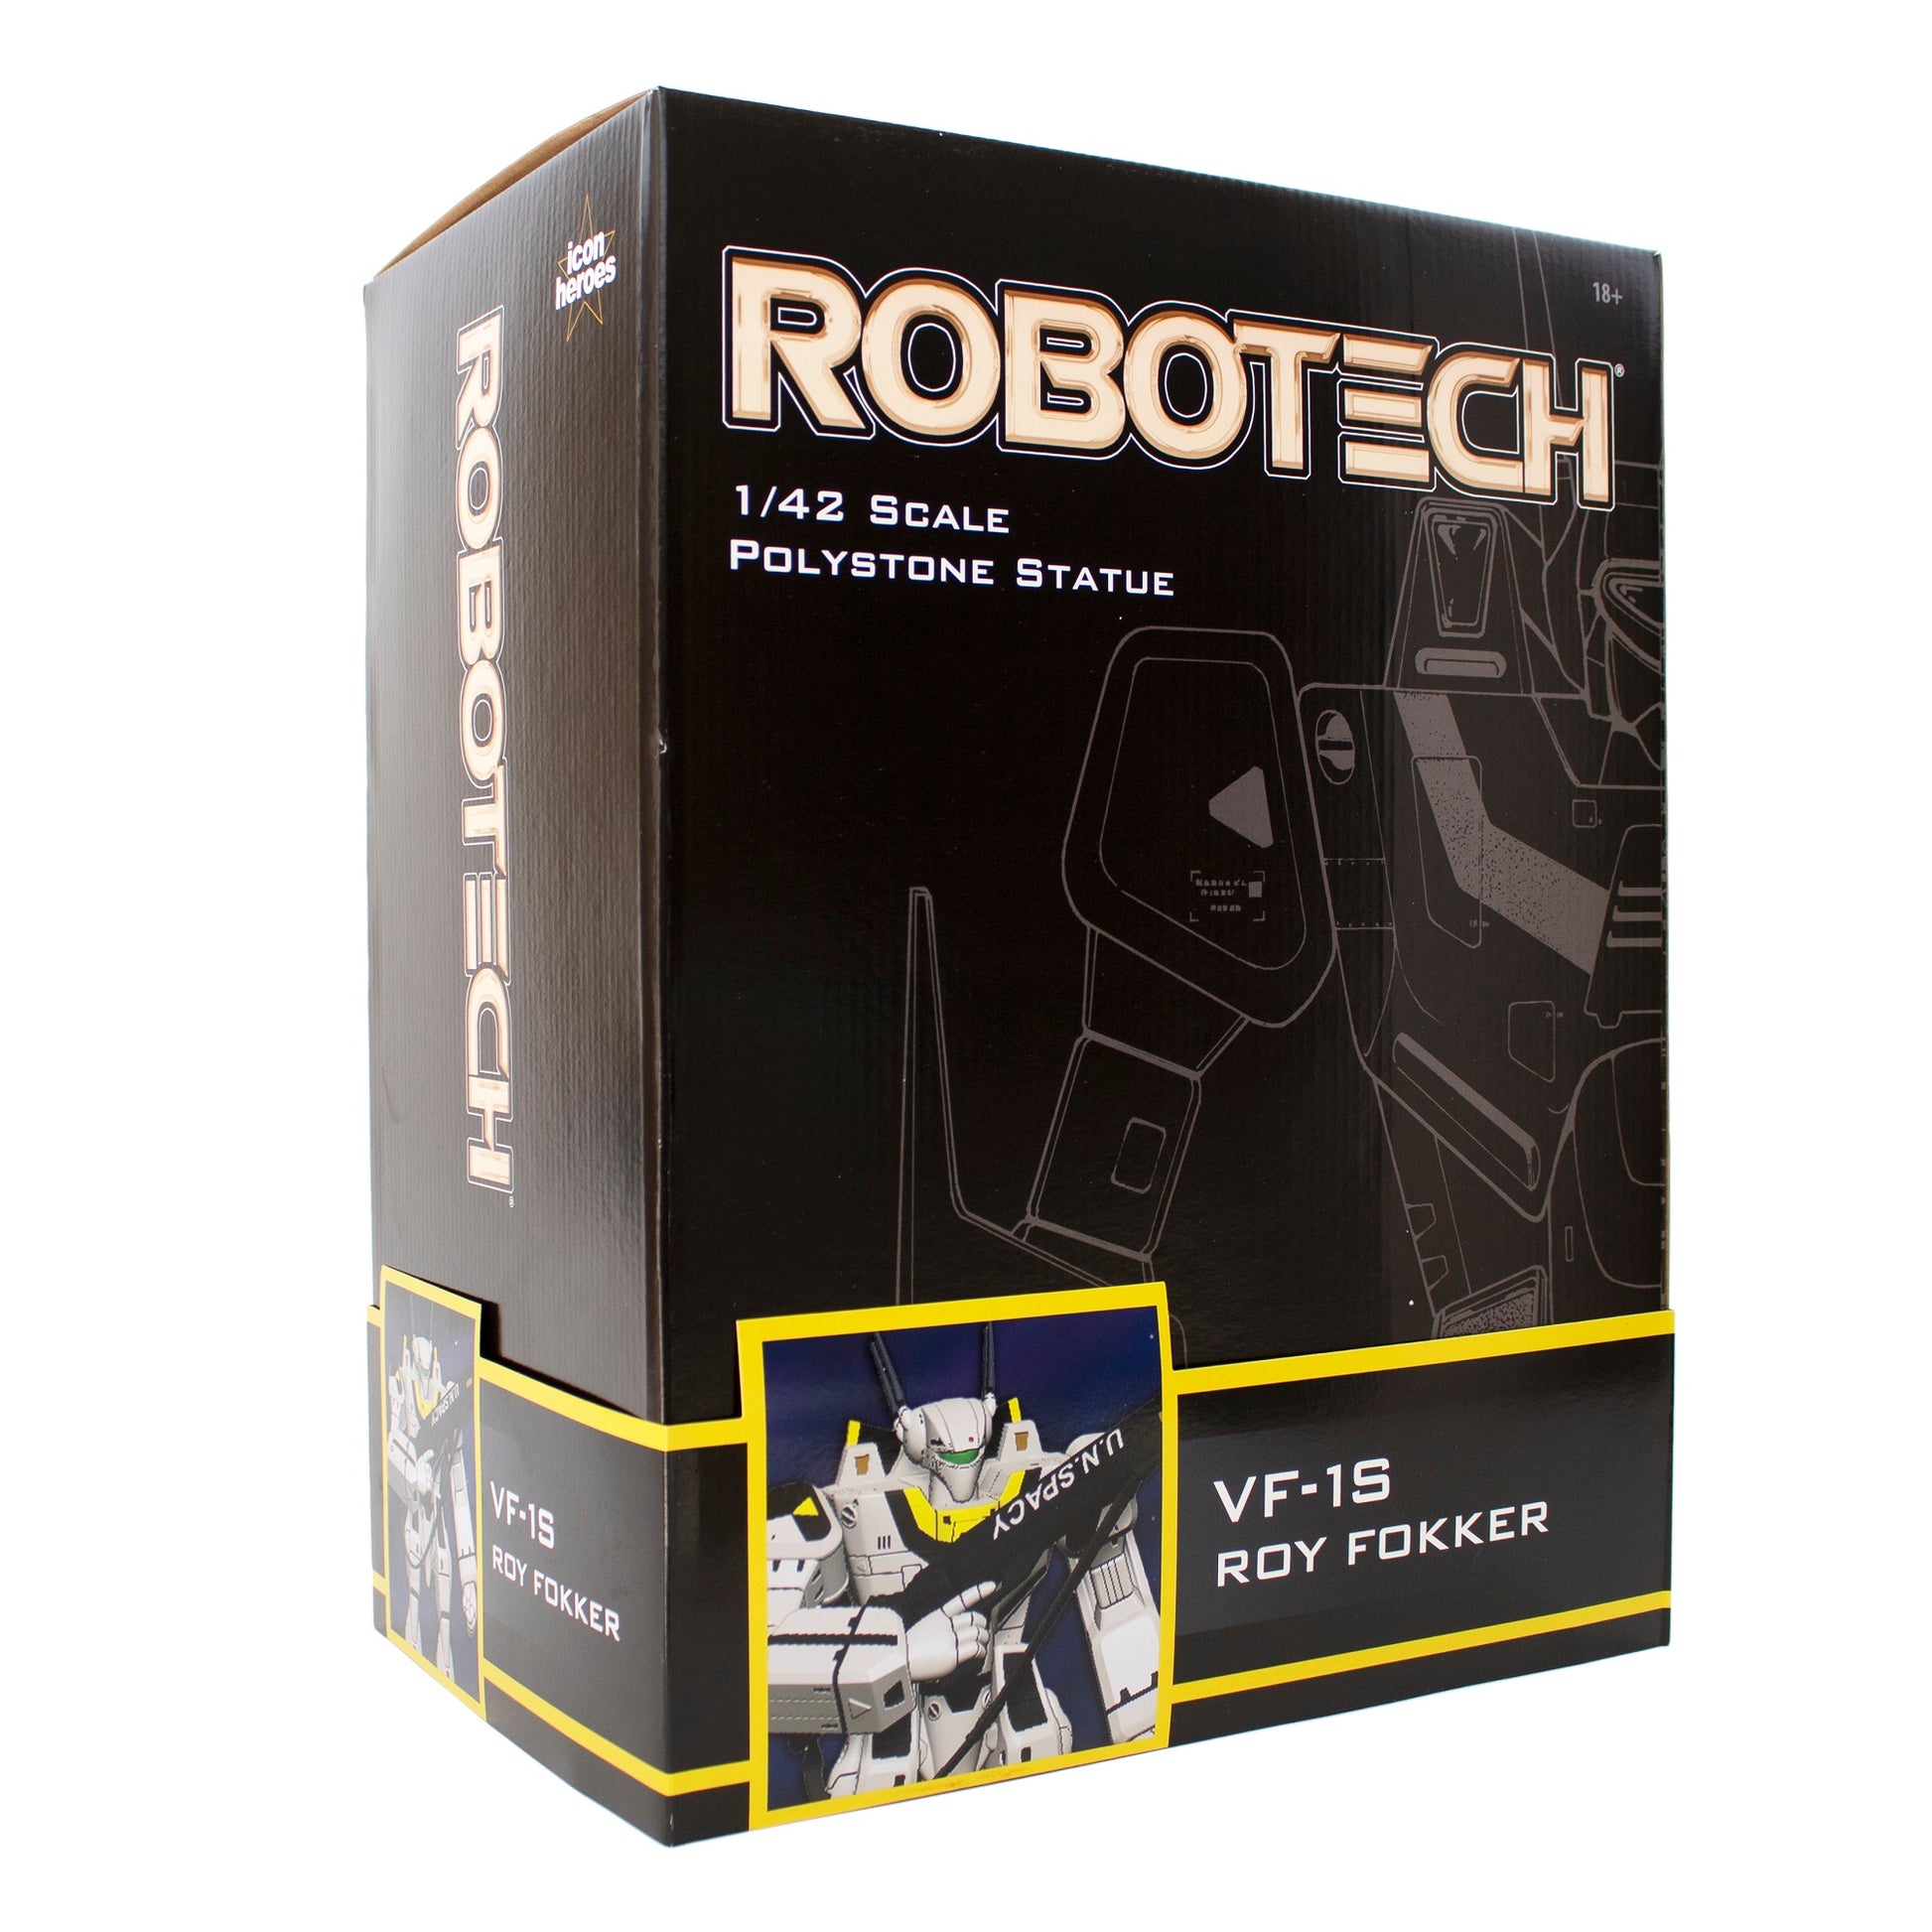 Robotech VF-1S Roy Fokker Battloid 1/42 Scale Polystone Statue - Icon Heroes 